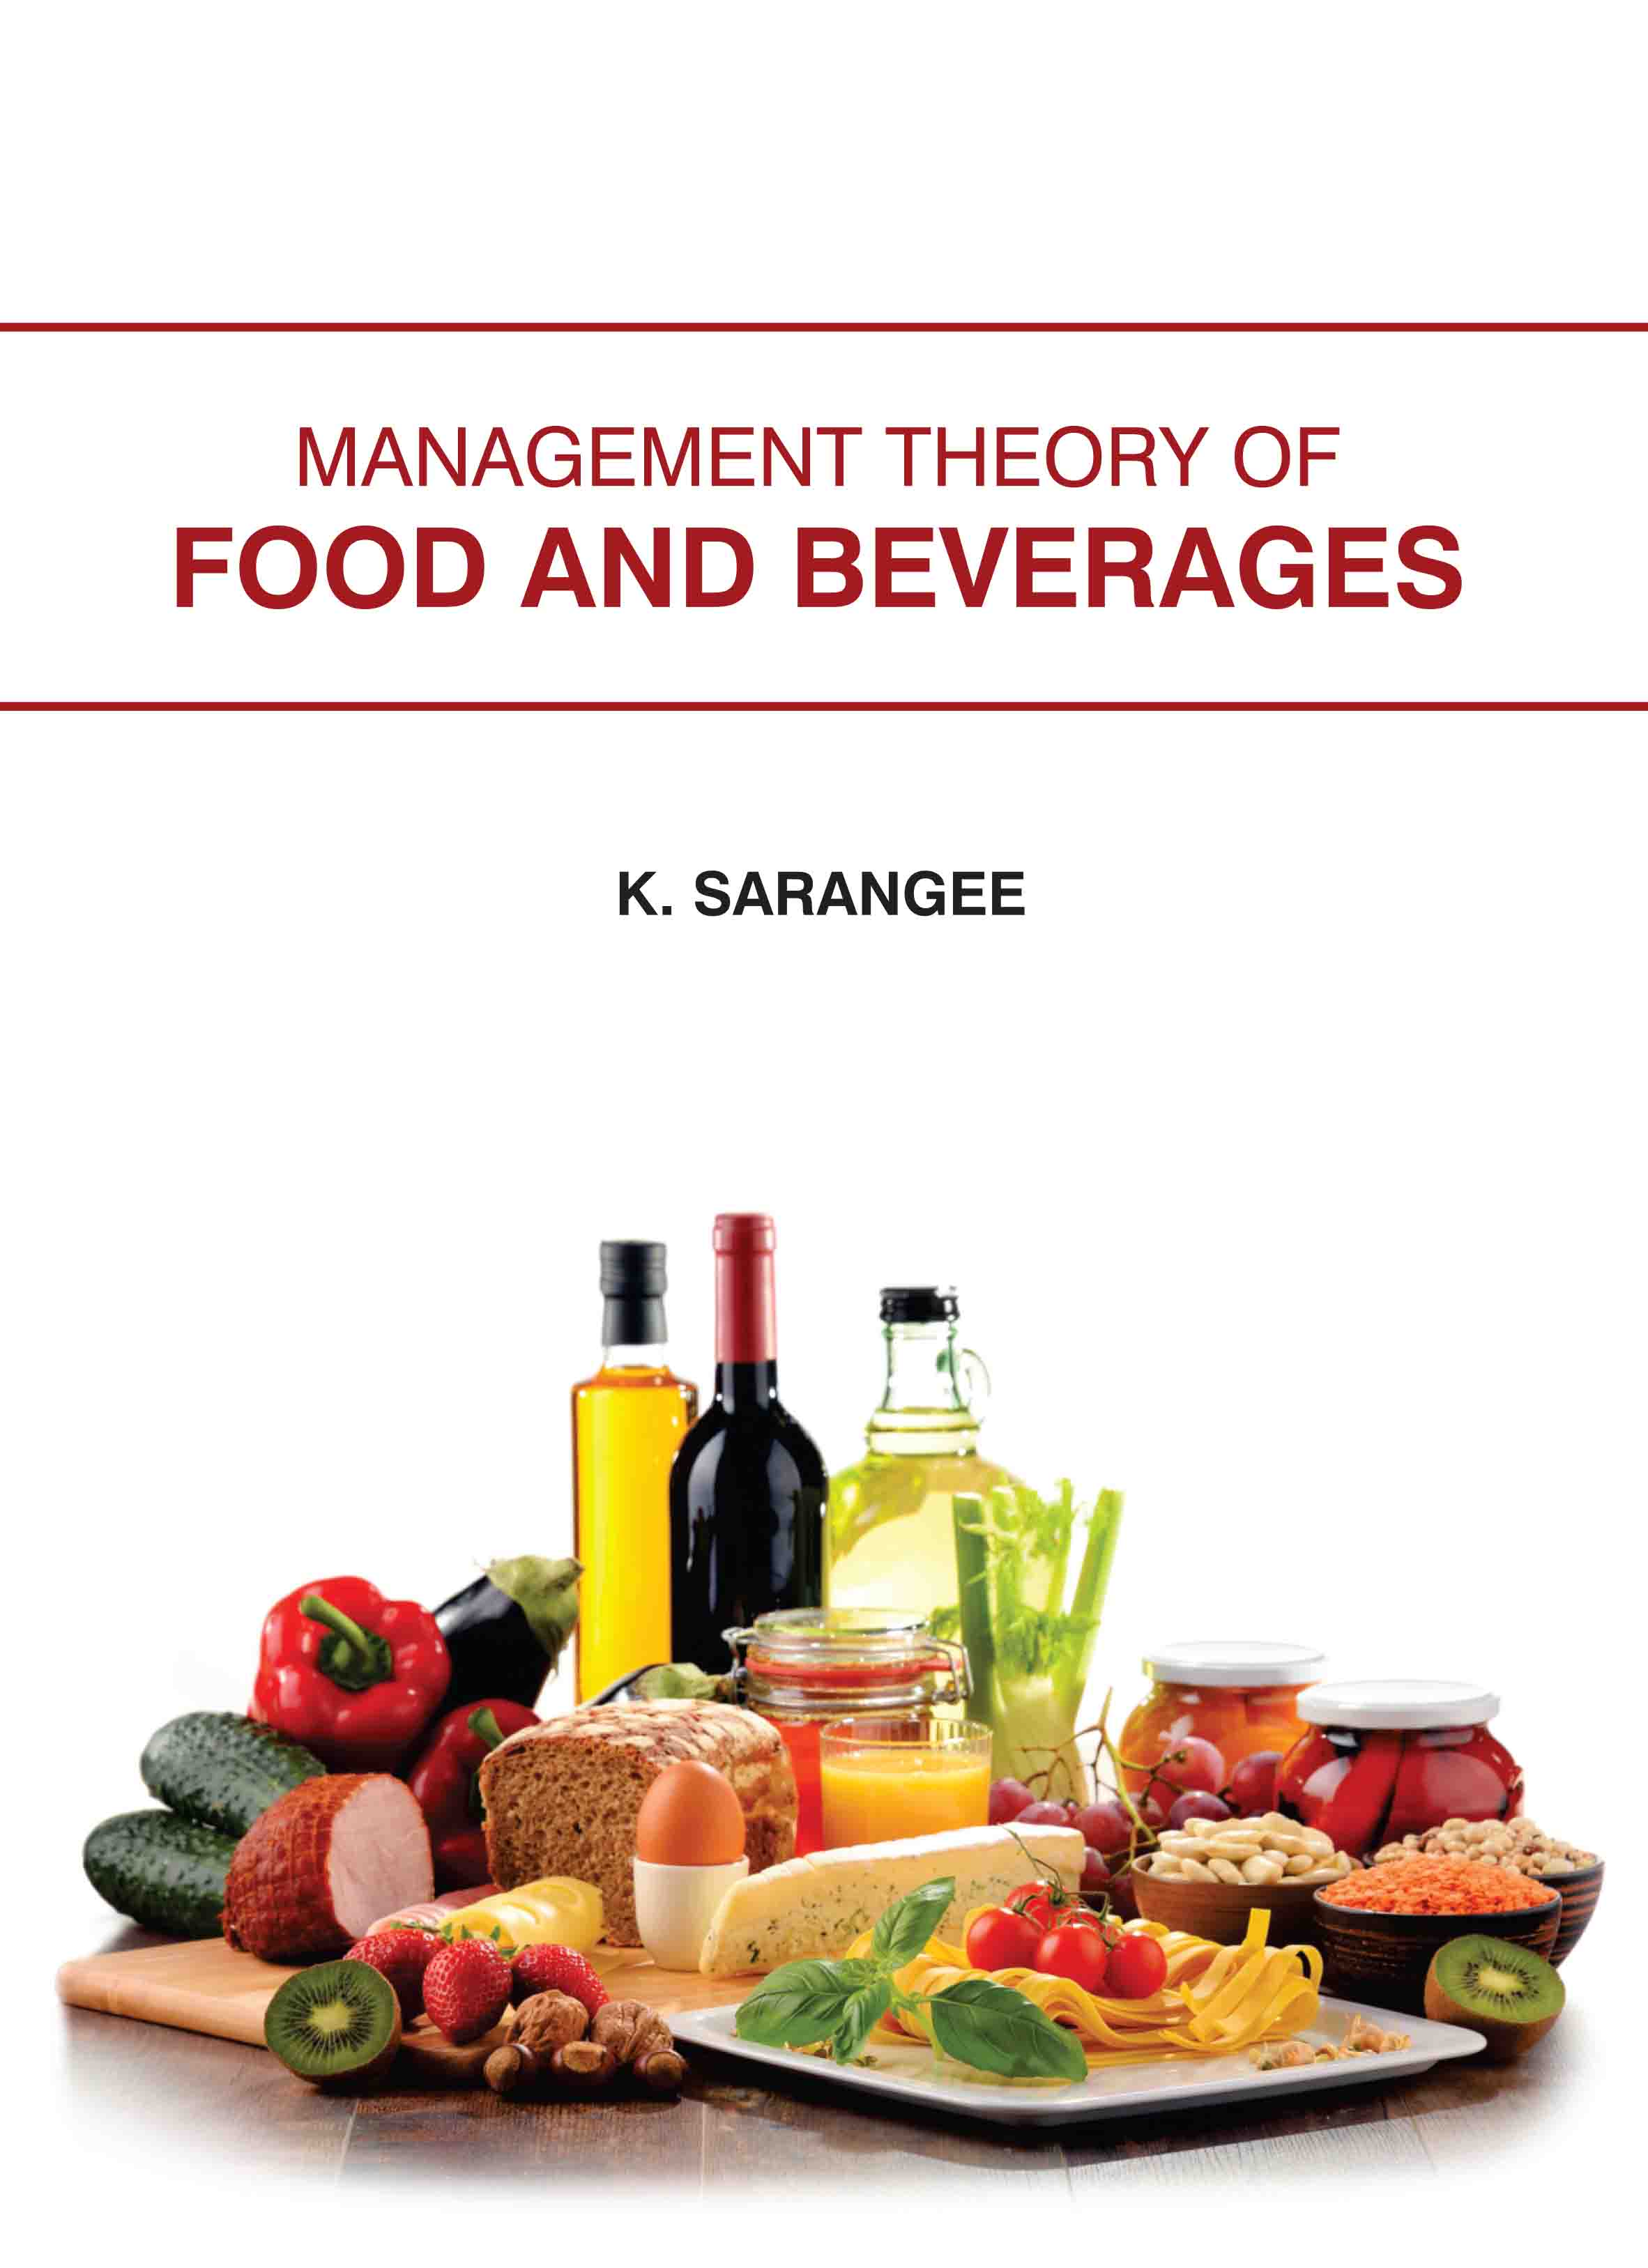 Management Theory of Food and Beverages